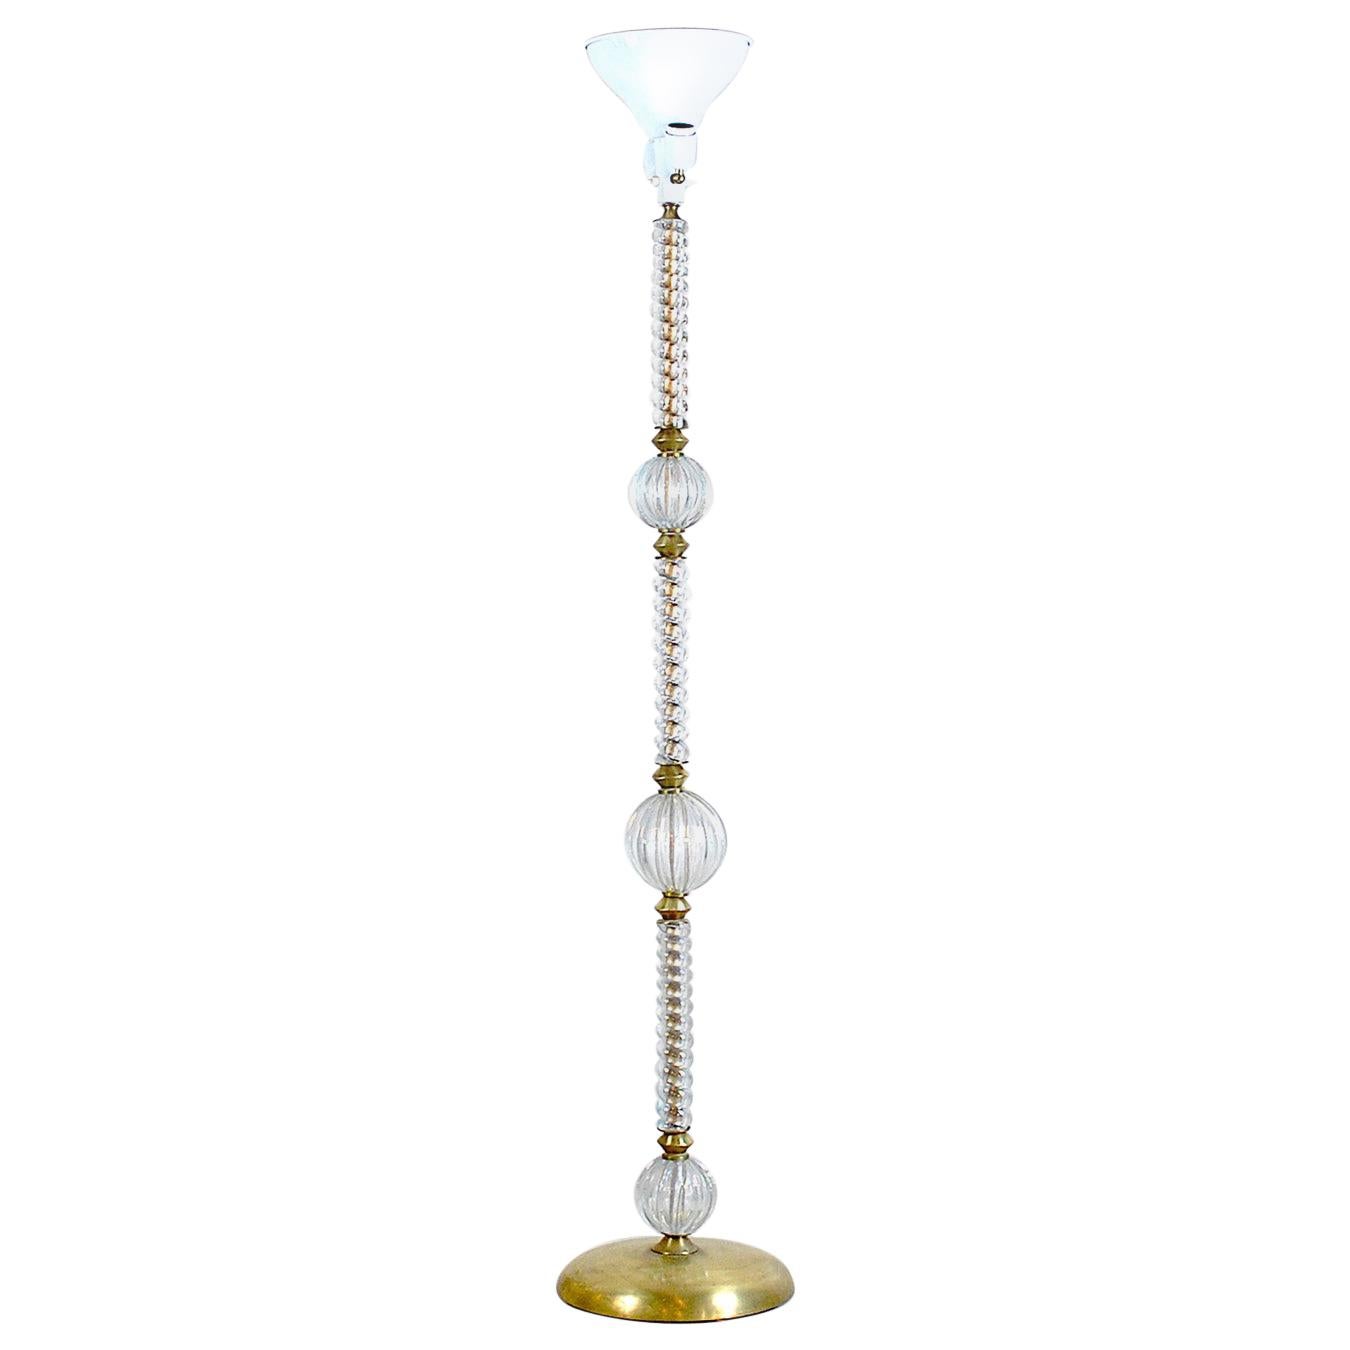 Italian Midcentury Floor Lamp by Barovier & Toso For Sale